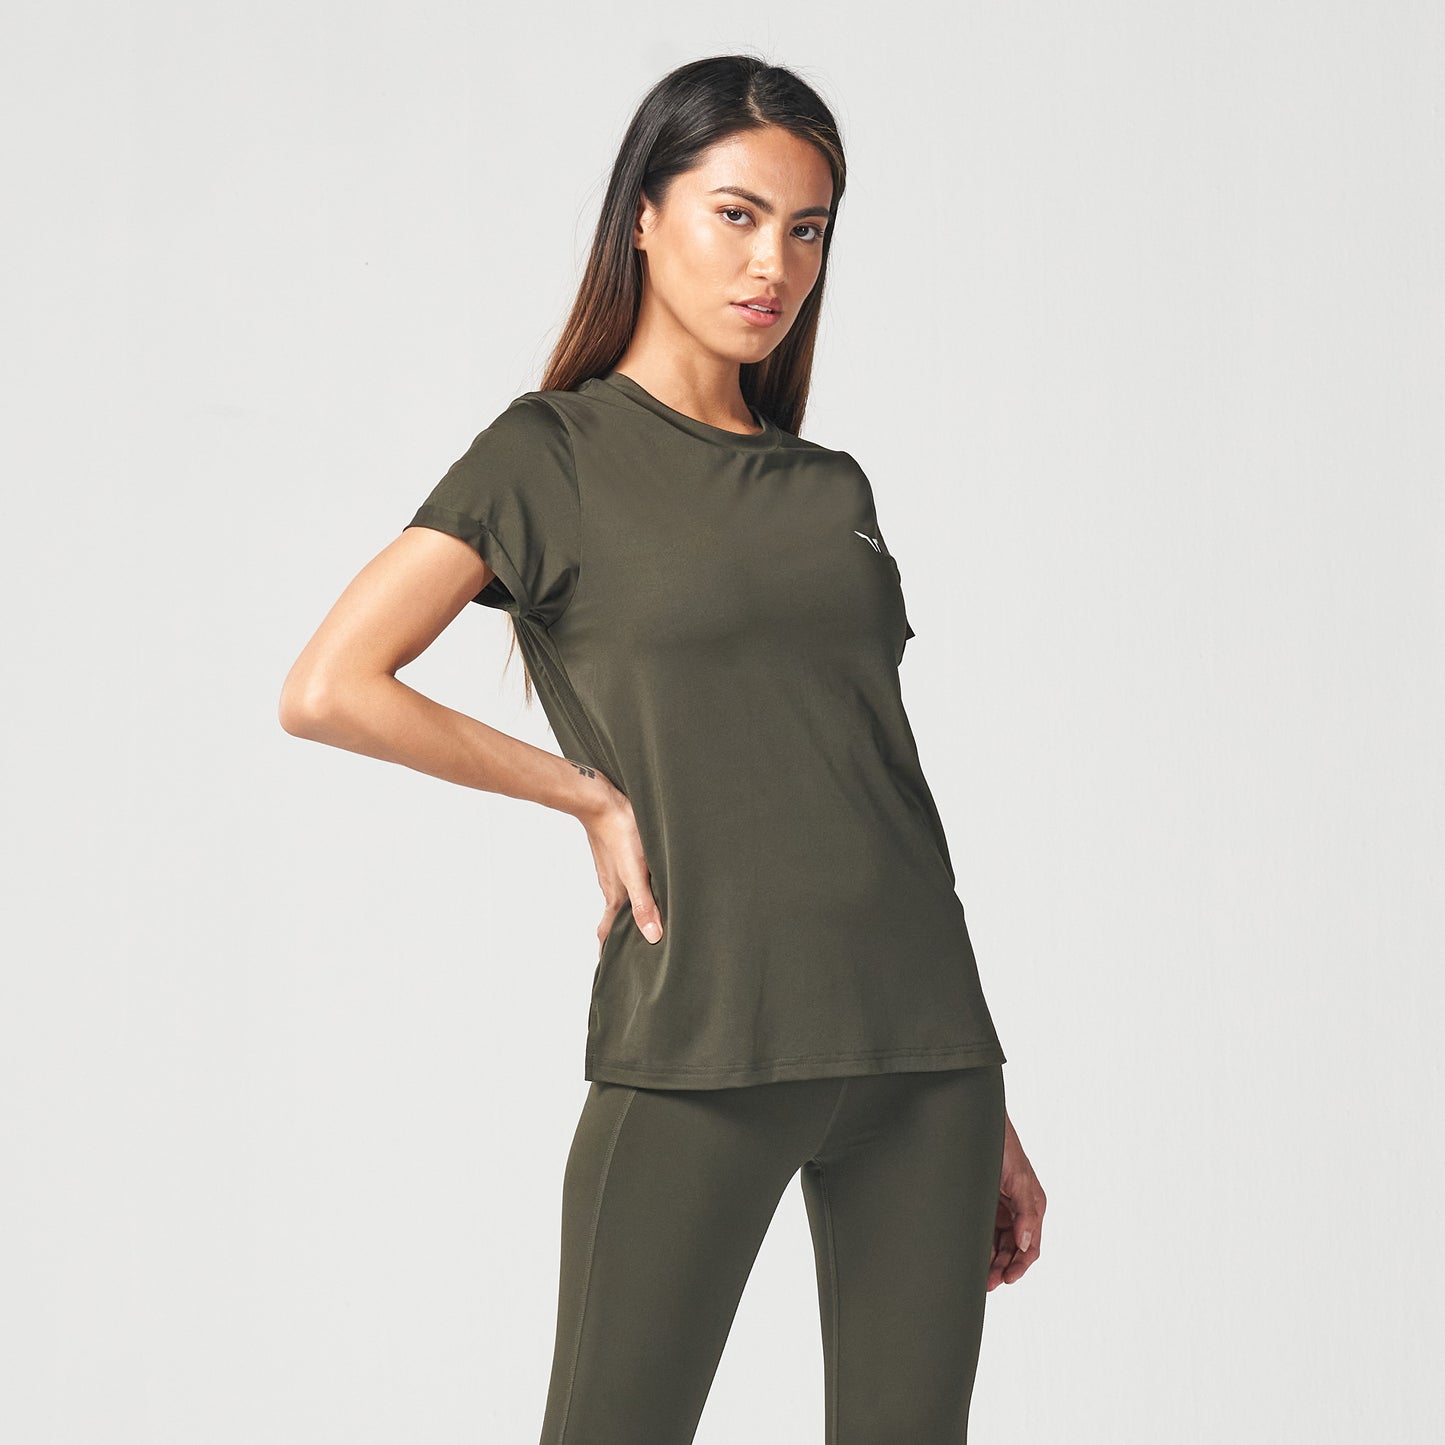 squatwolf-workout-clothes-essential-relaxed-fit-tee-khaki-gym-t-shirts-for-women